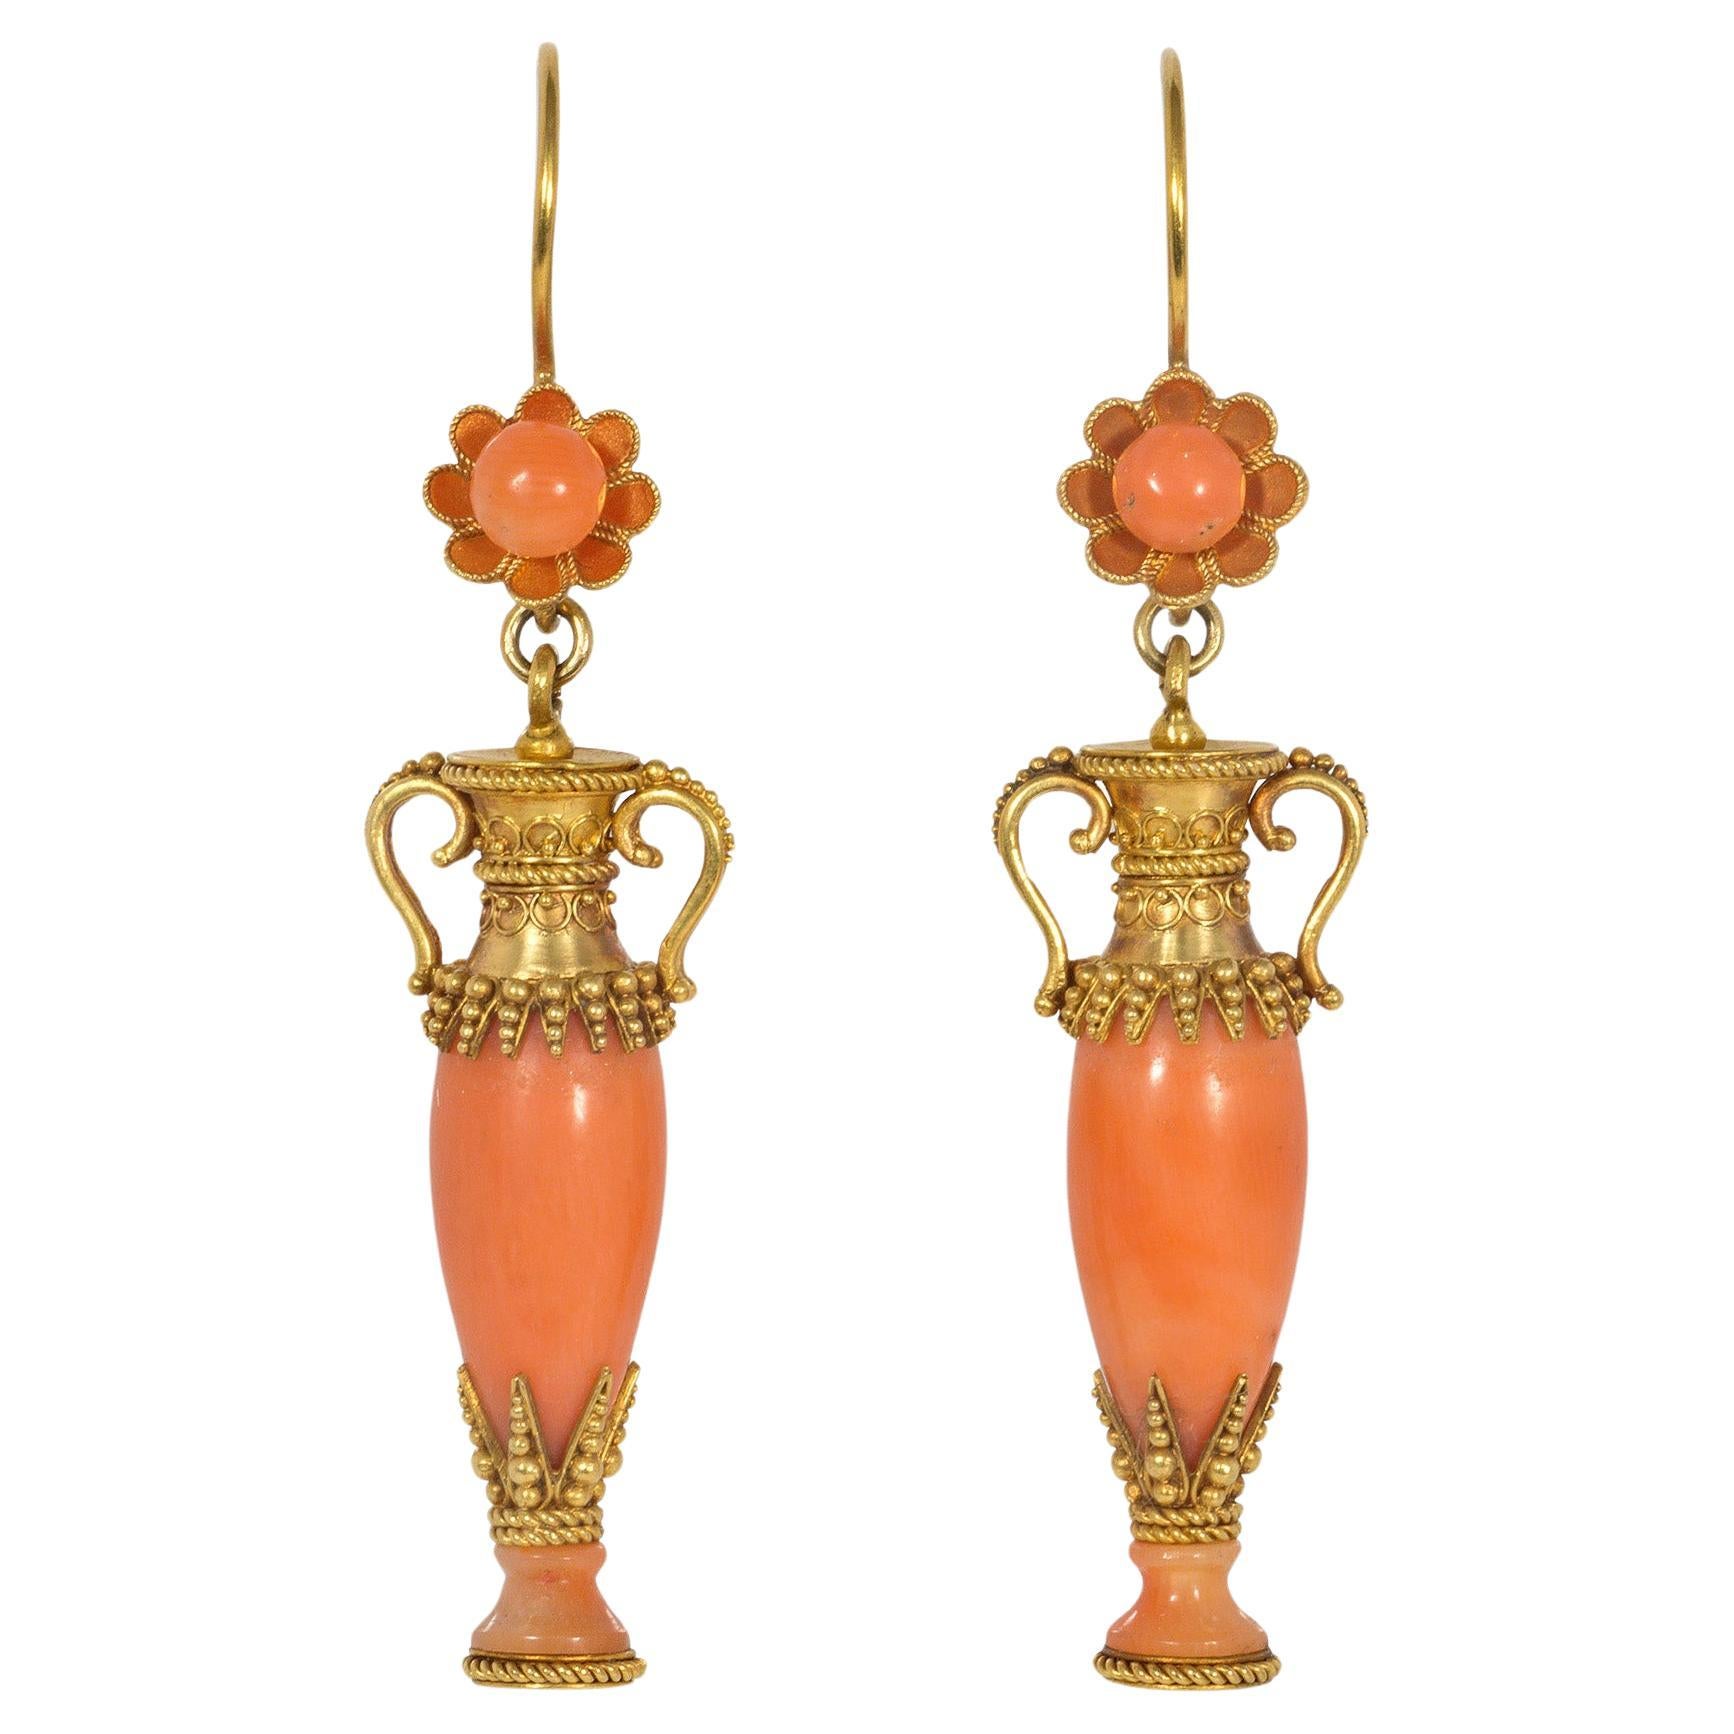 Antique Etruscan Revival Gold and Coral Earrings with Urn-Shaped Pendants For Sale